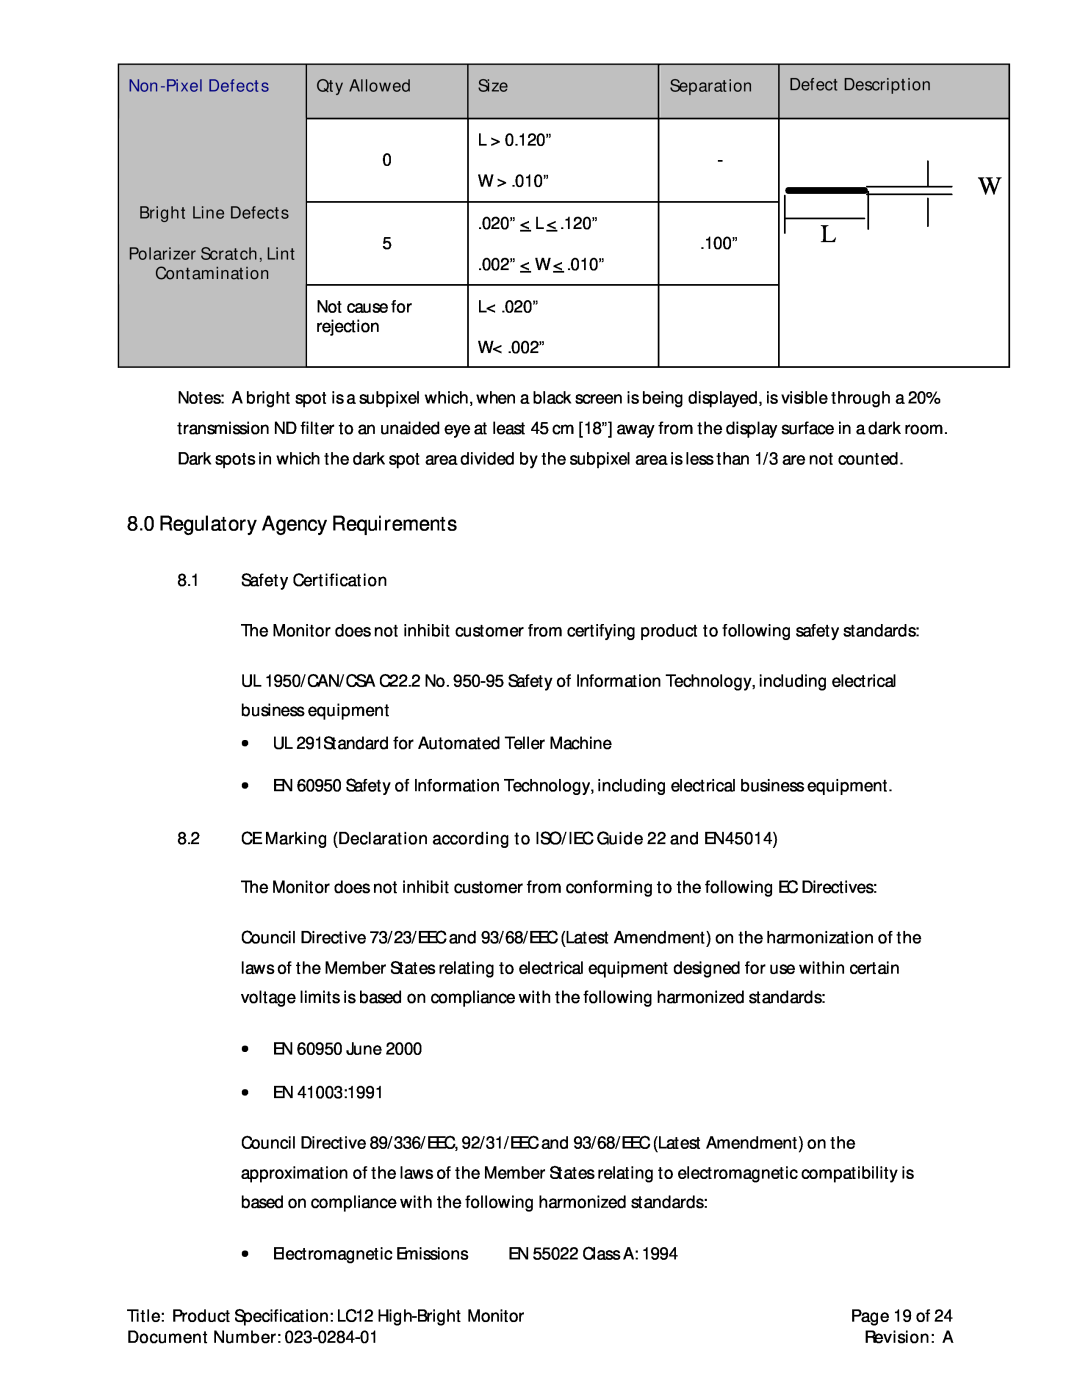 Planar LC12 manual Regulatory Agency Requirements, Non-Pixel Defects 